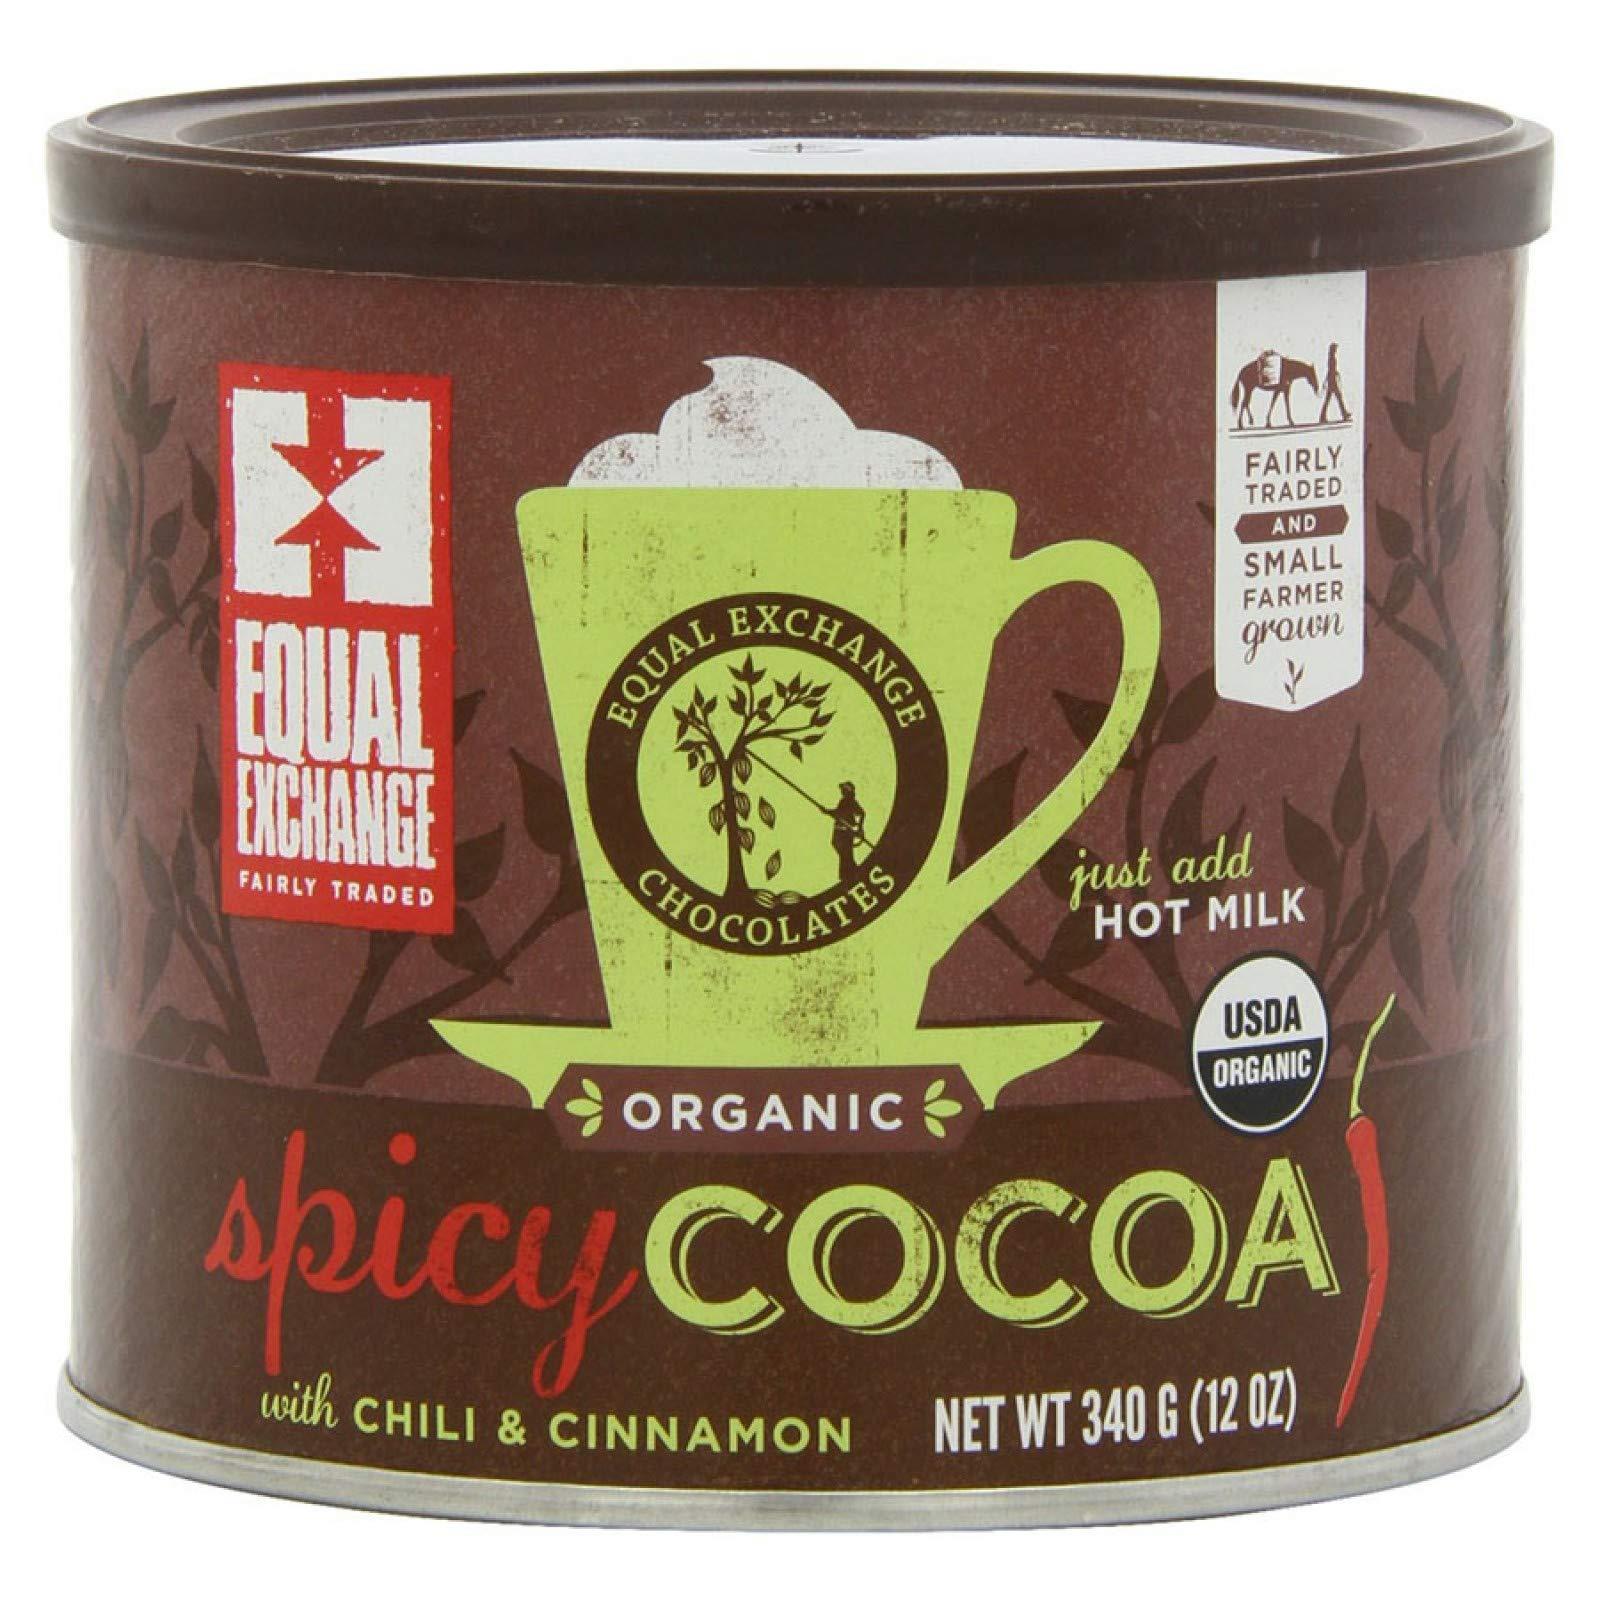 EQUAL EXCHANGE Organic Spicy Hot Cocoa, 12 OZ